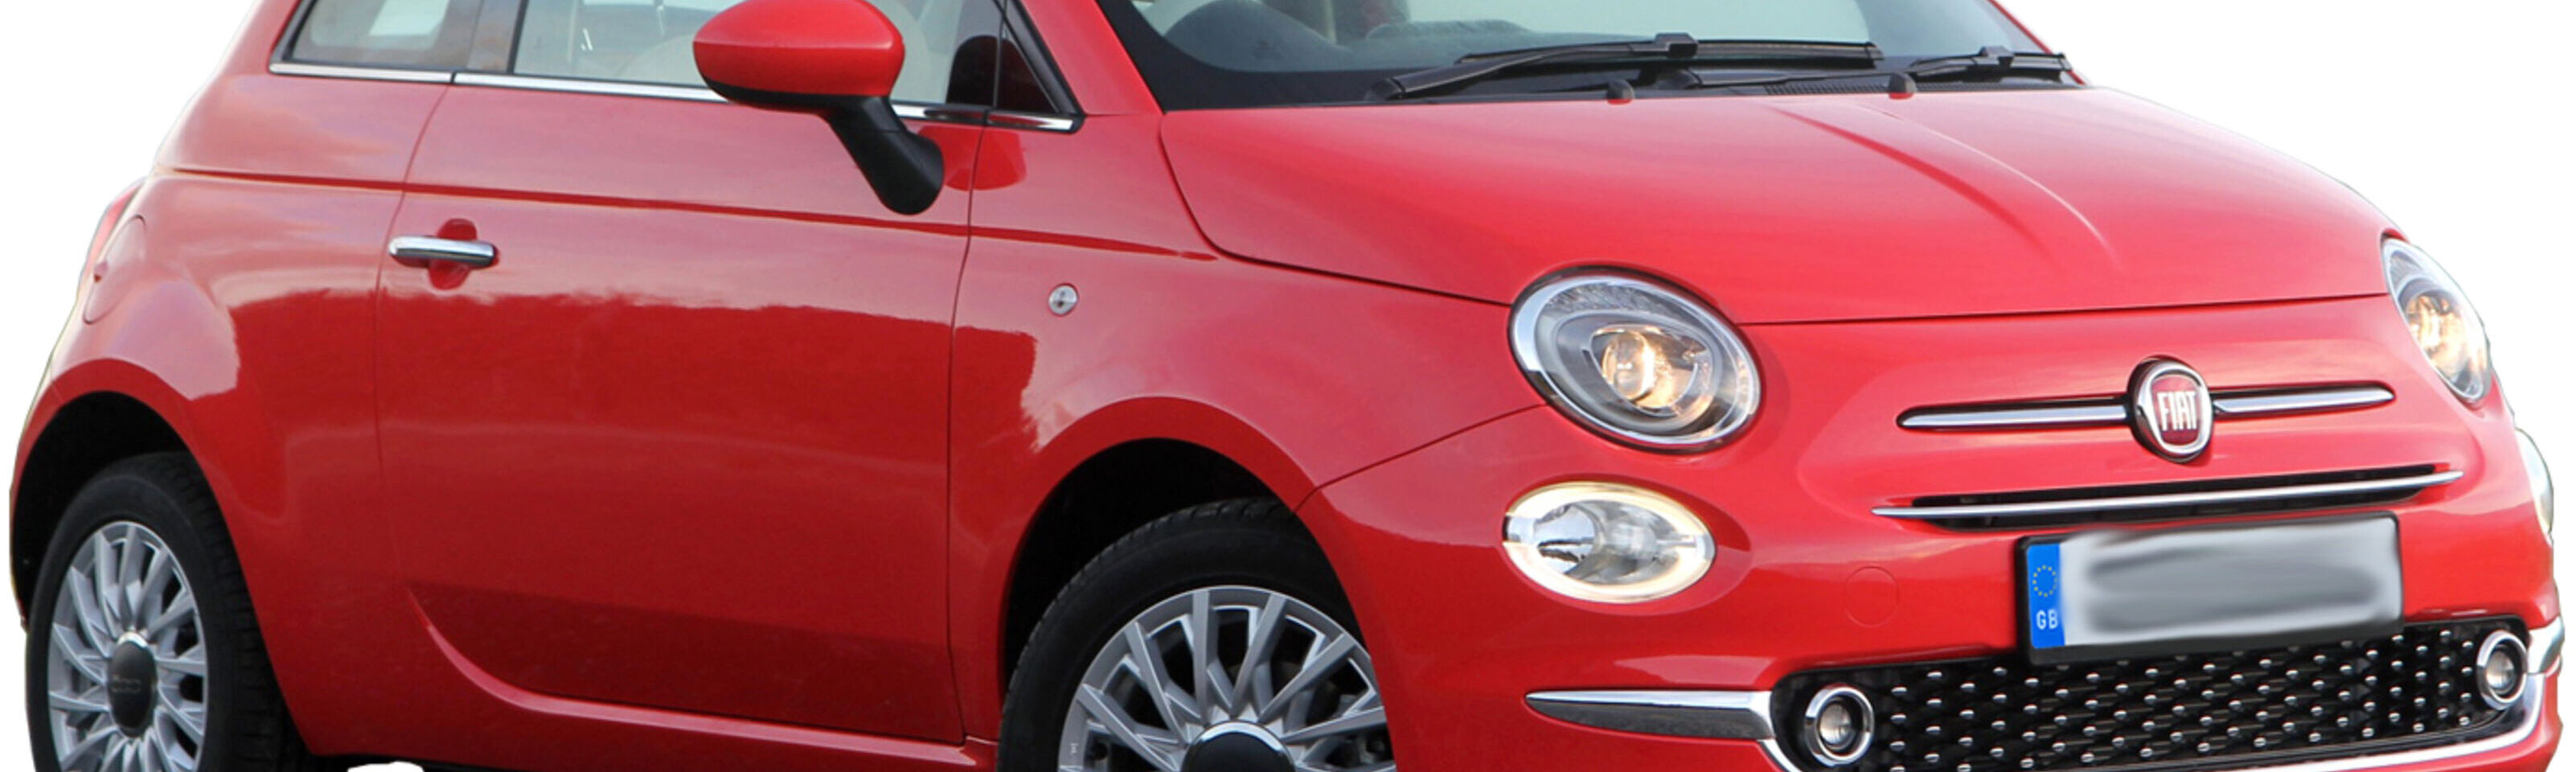 What makes the Fiat 500 the perfect city car?